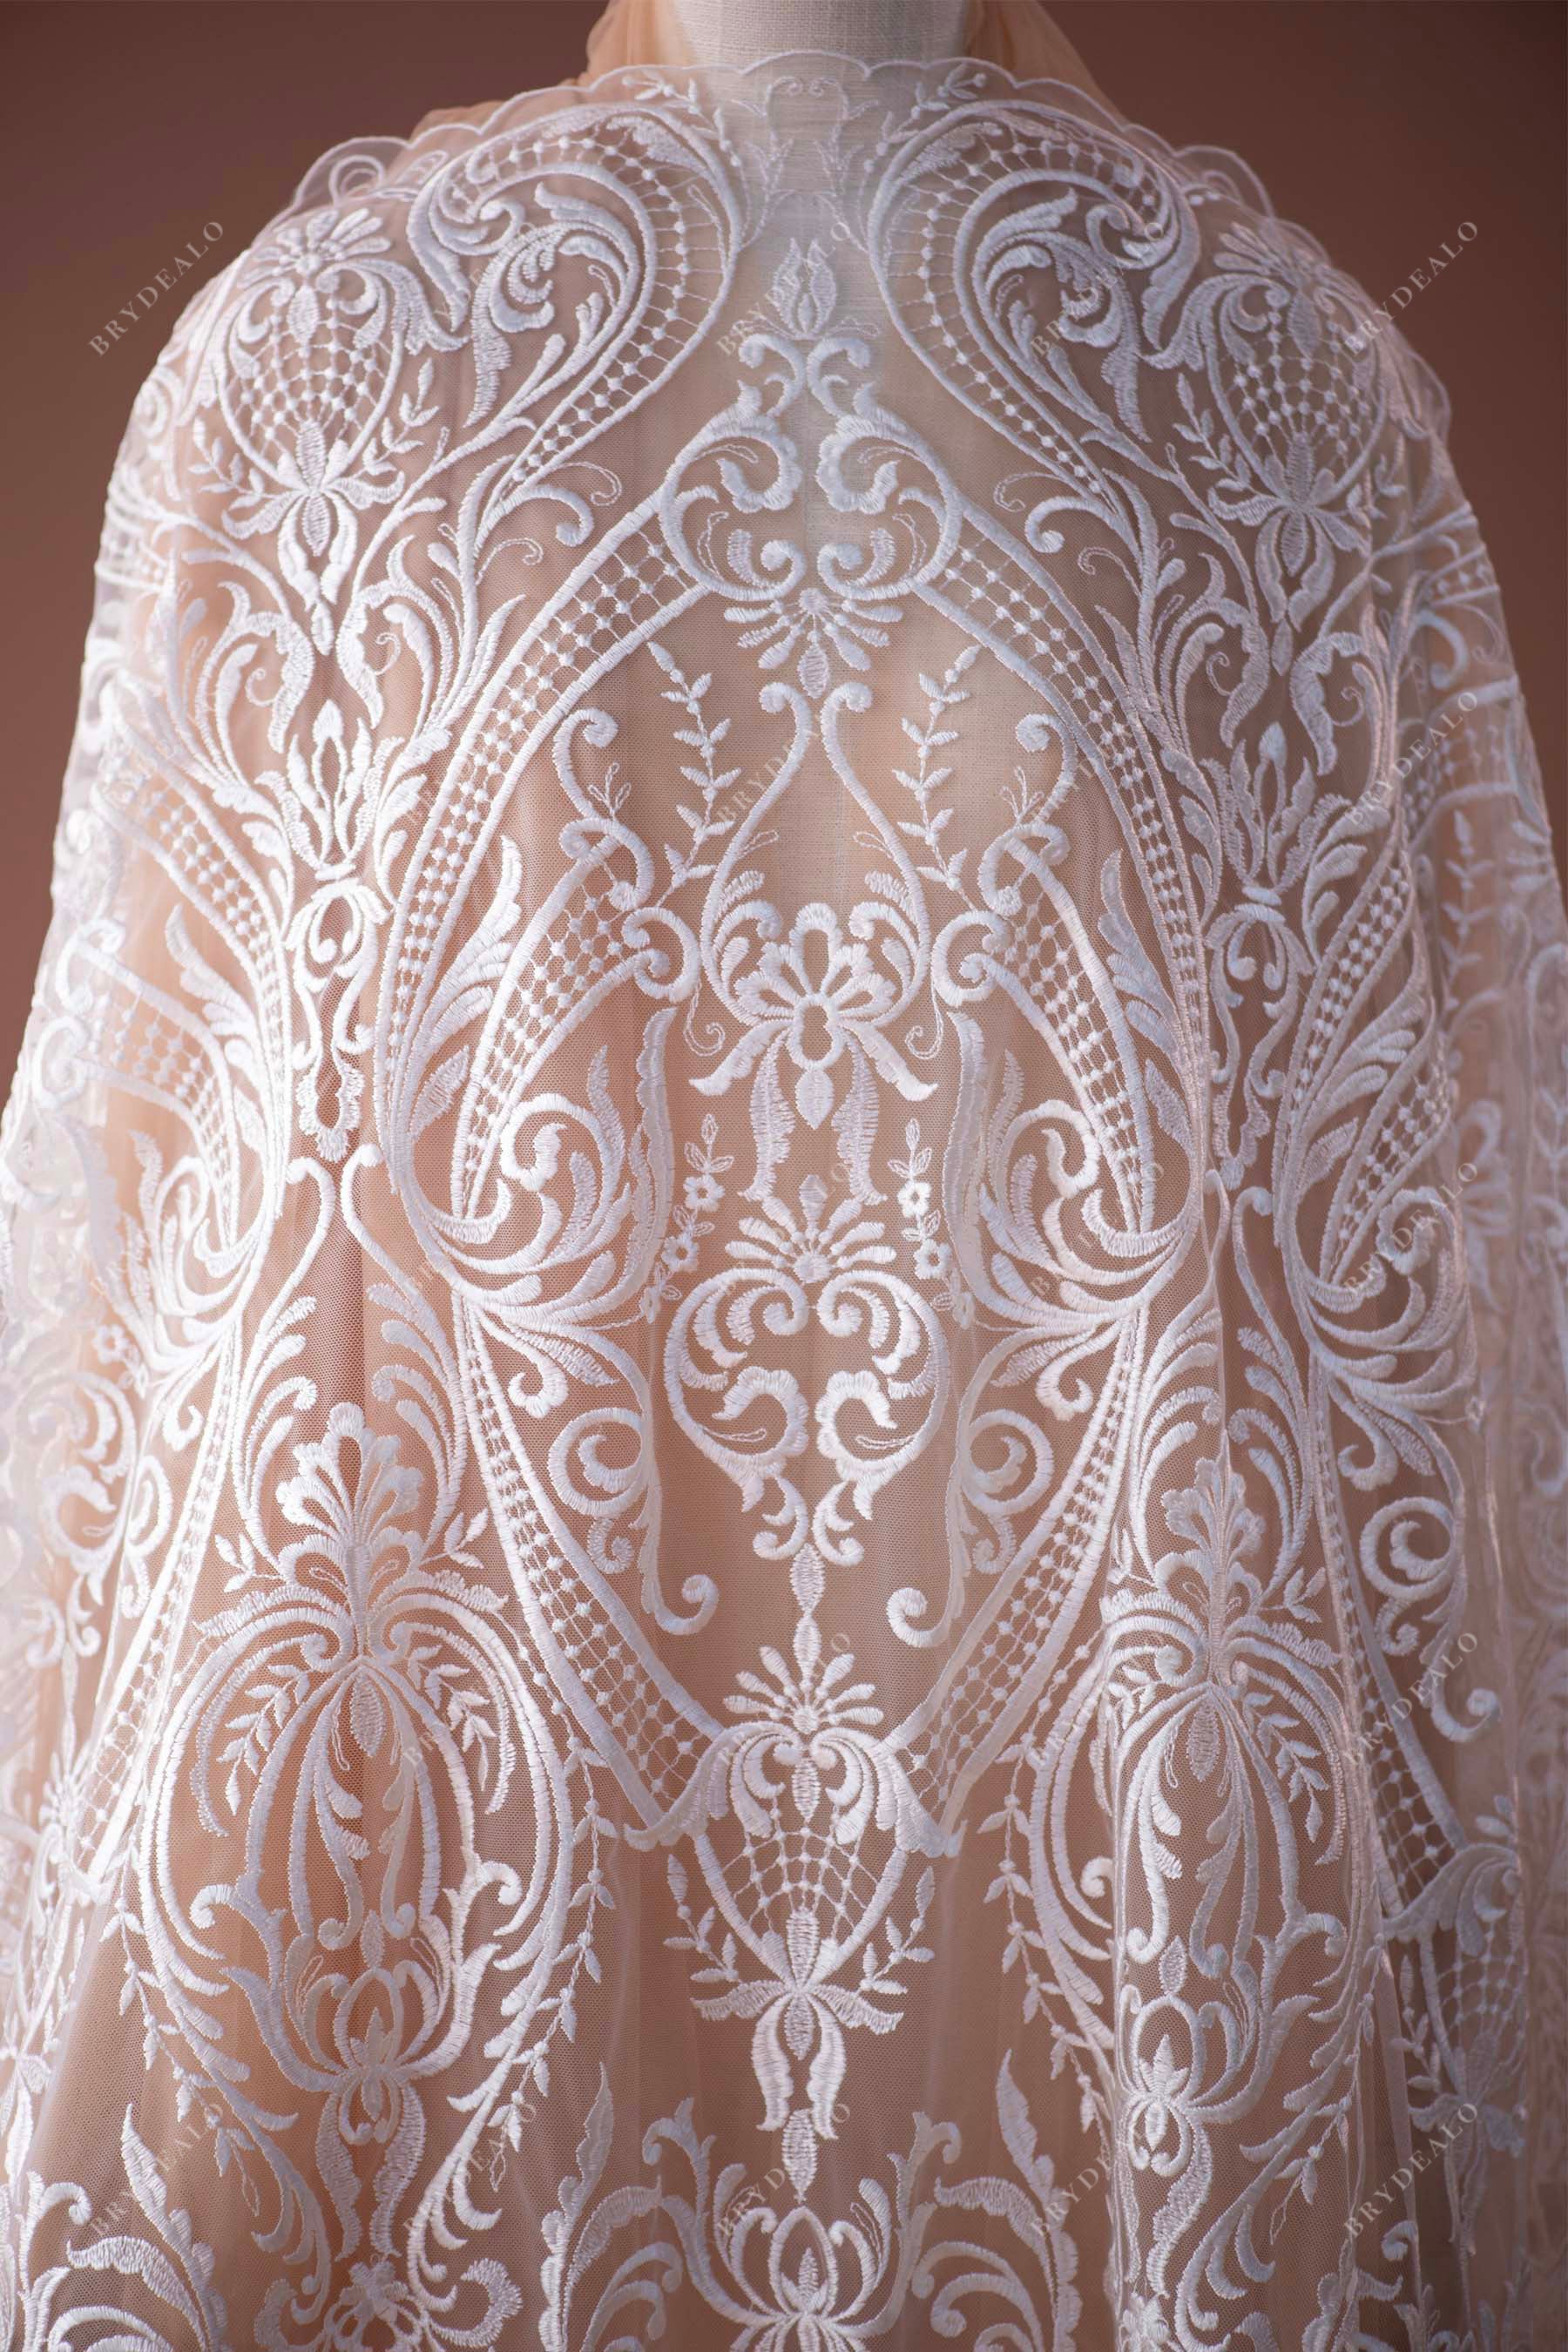 Embroidery Abstract Patterned Bridal Lace Fabric By the Yard